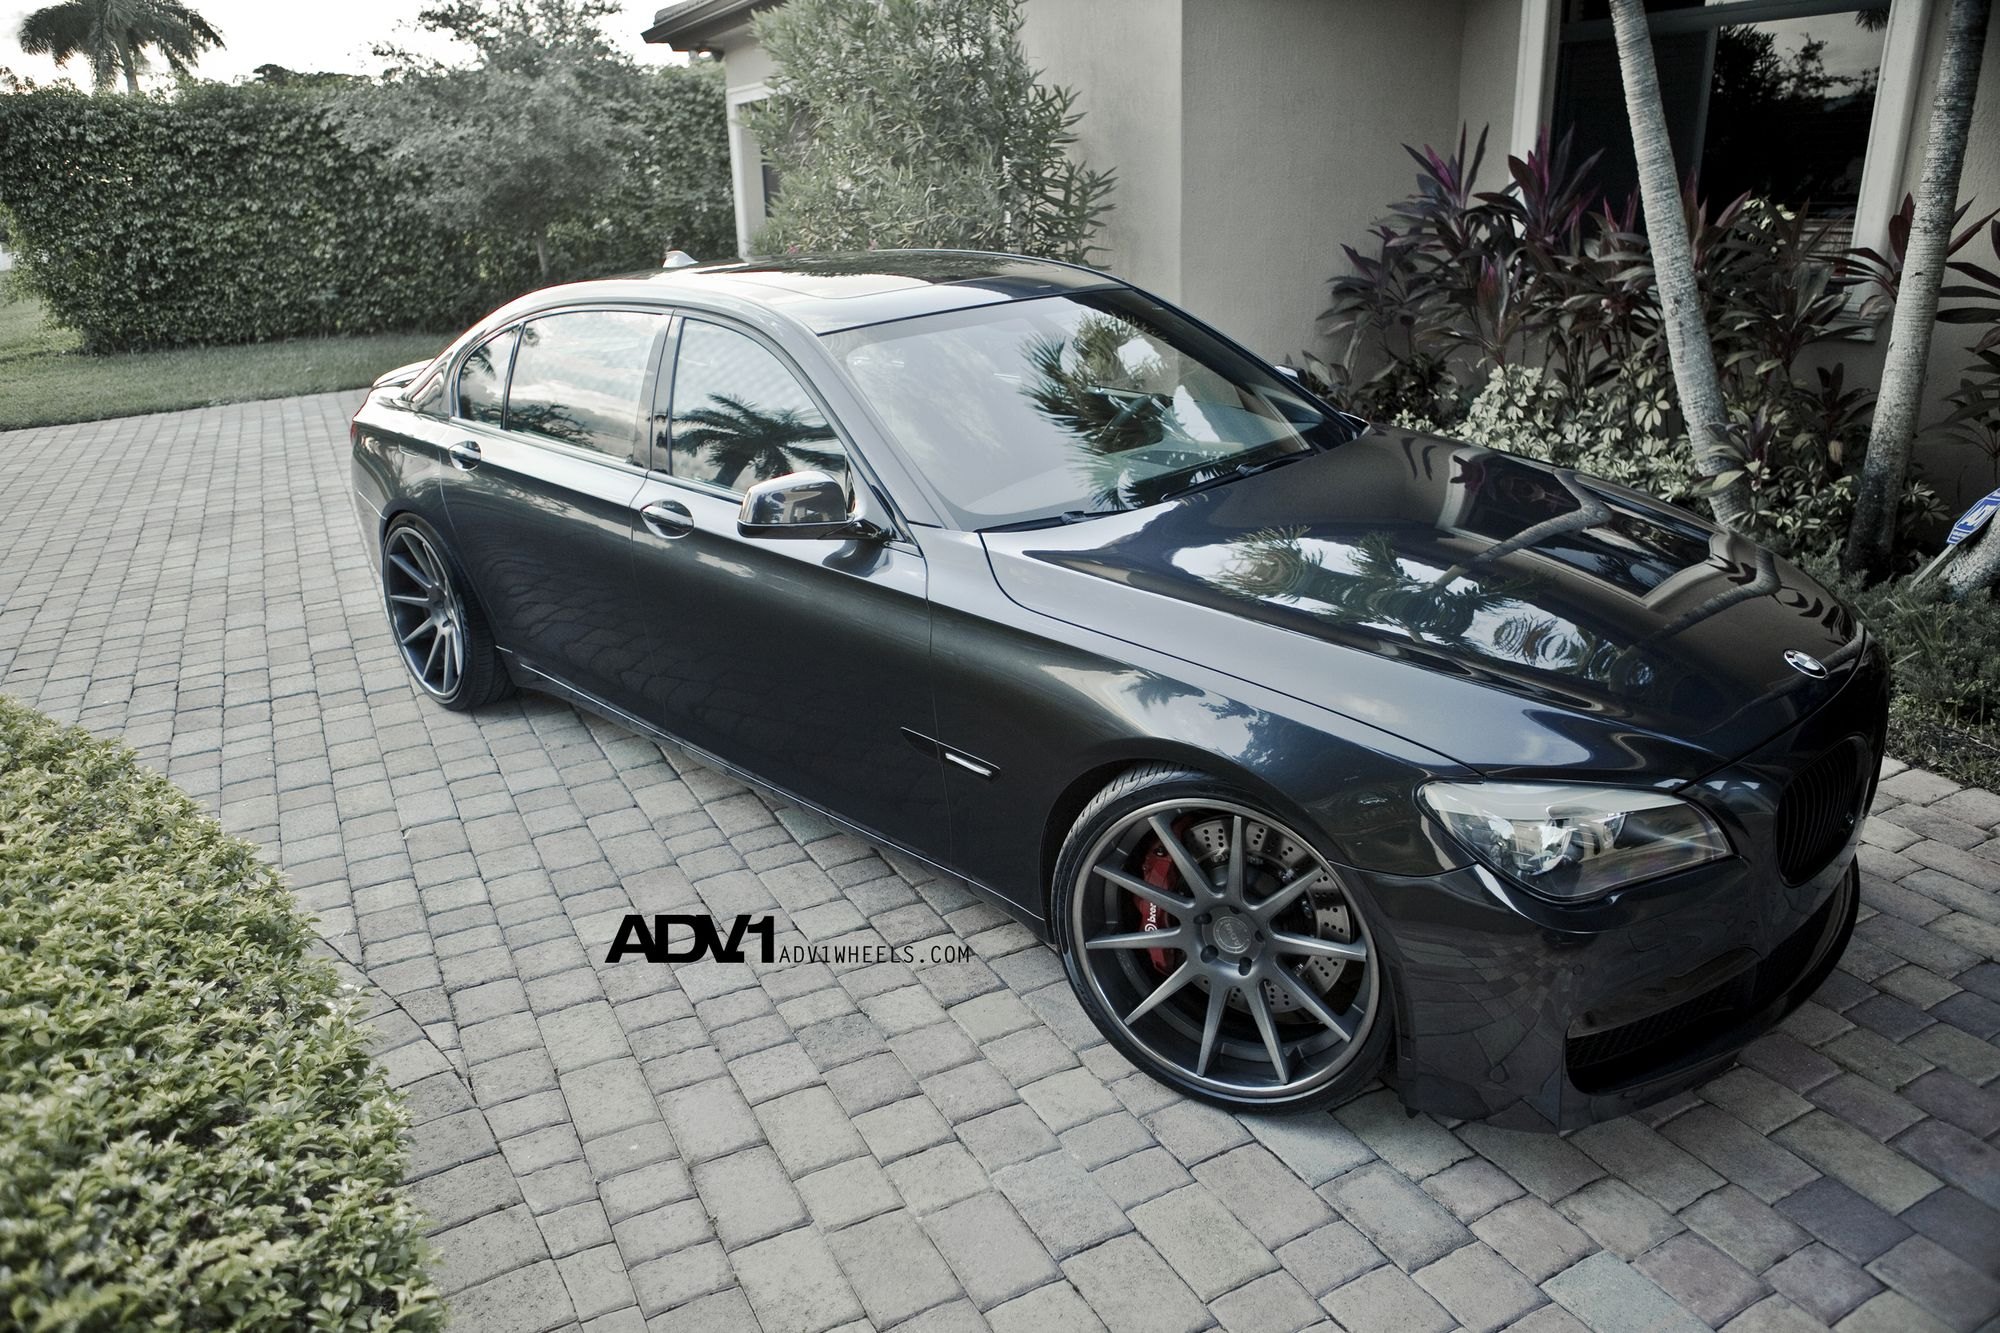 ADV1 Rims with Red Brembo Brakes on BMW 7-Series - Photo by ADV.1